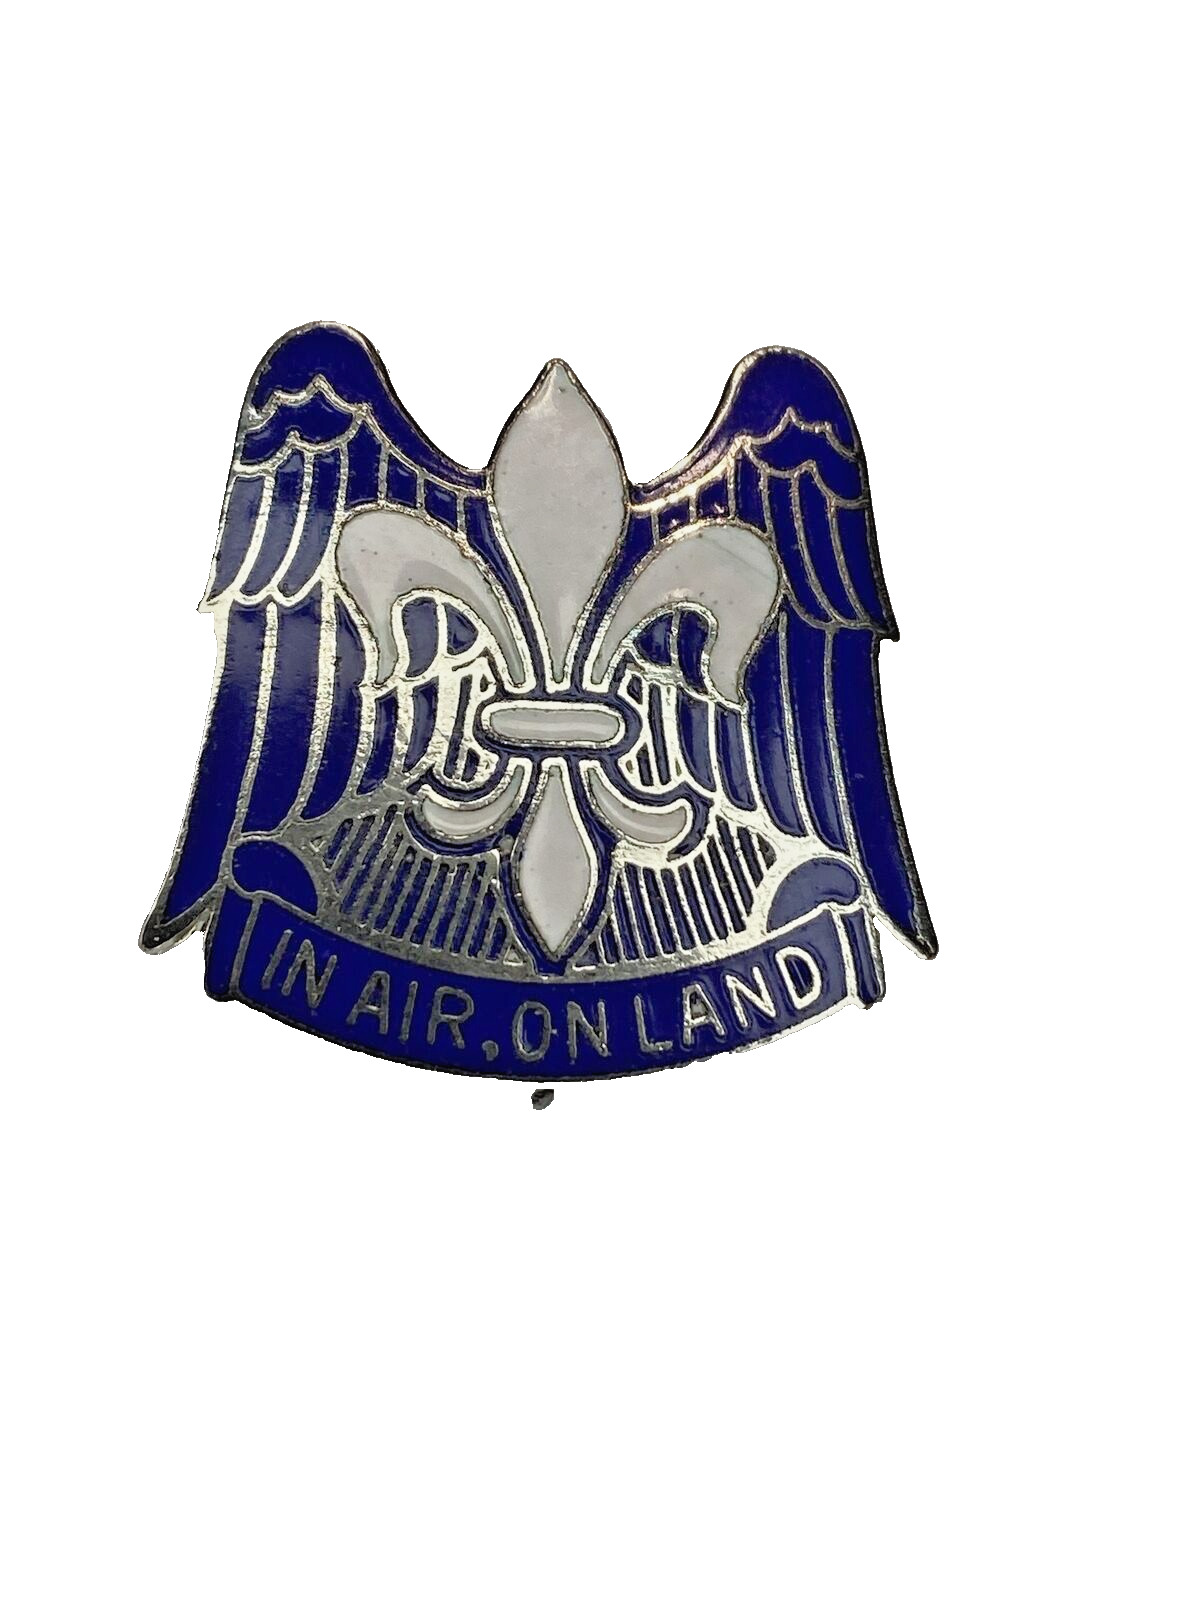 WWII Type Metal Lapel pinback US Army Airbourne In the air On Land/ Fleur De Lis